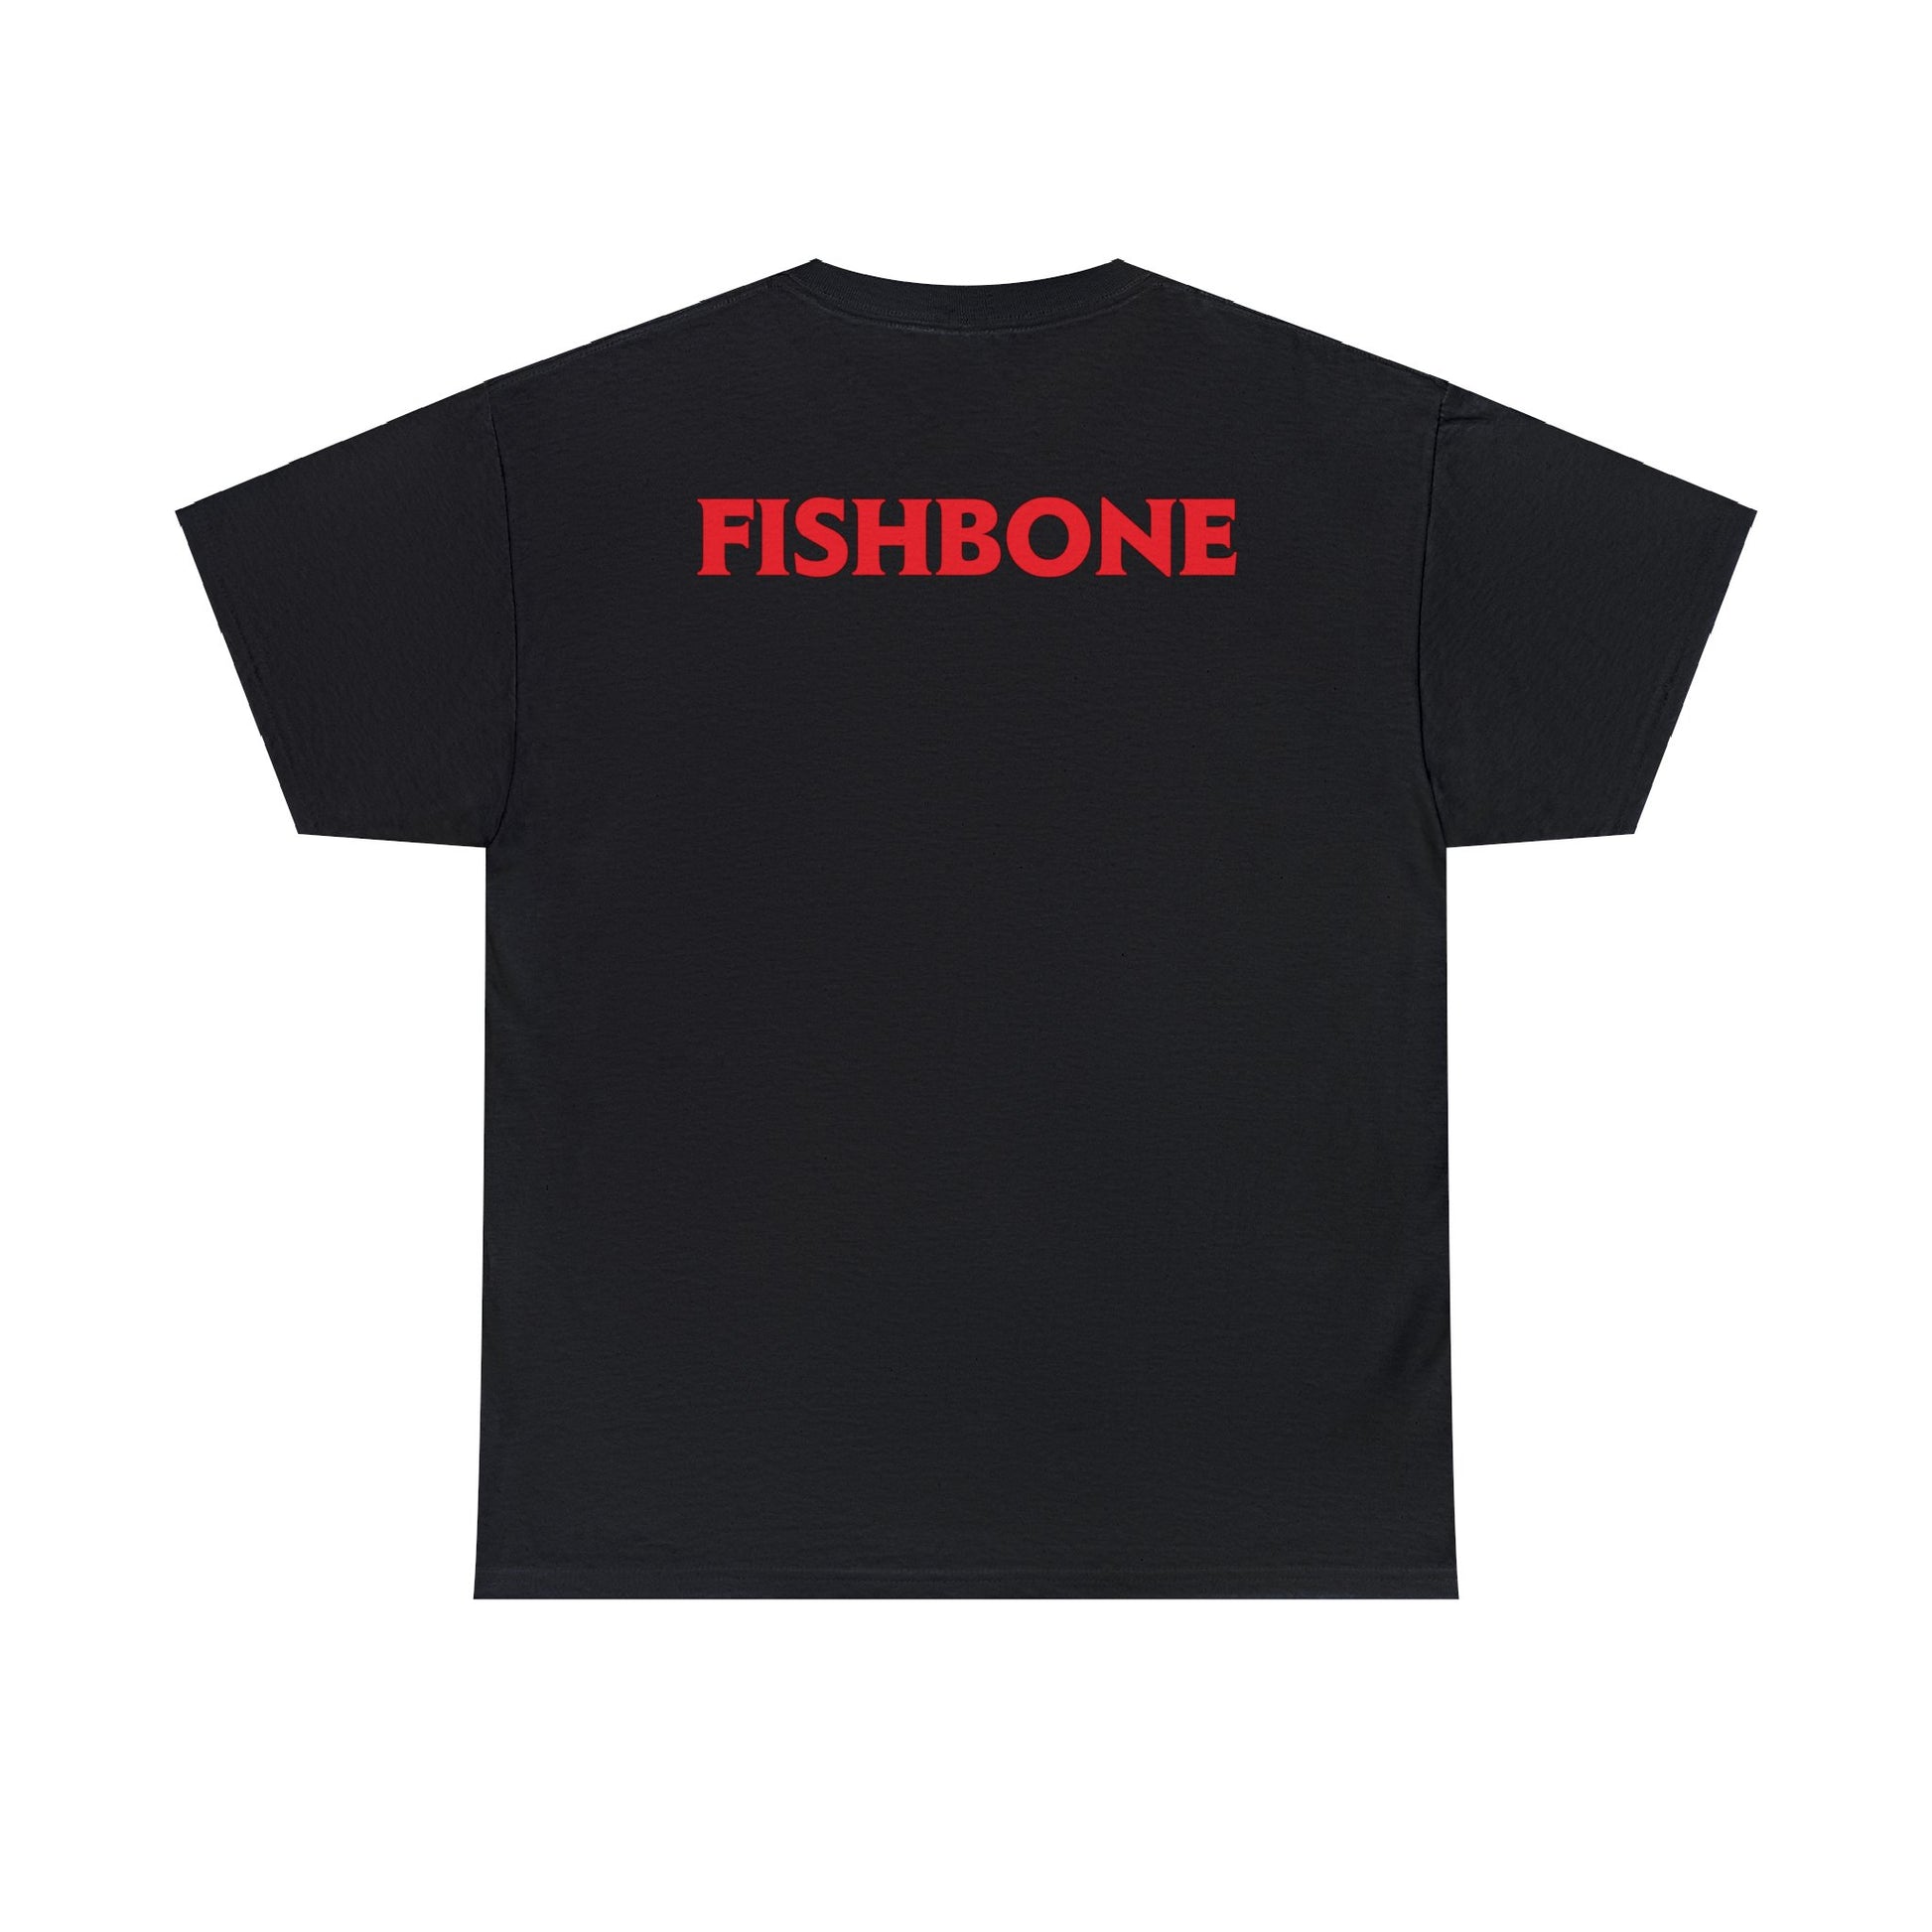 Fishbone Truth and Soul Ska Punk Rock 90s T-shirt for Sale